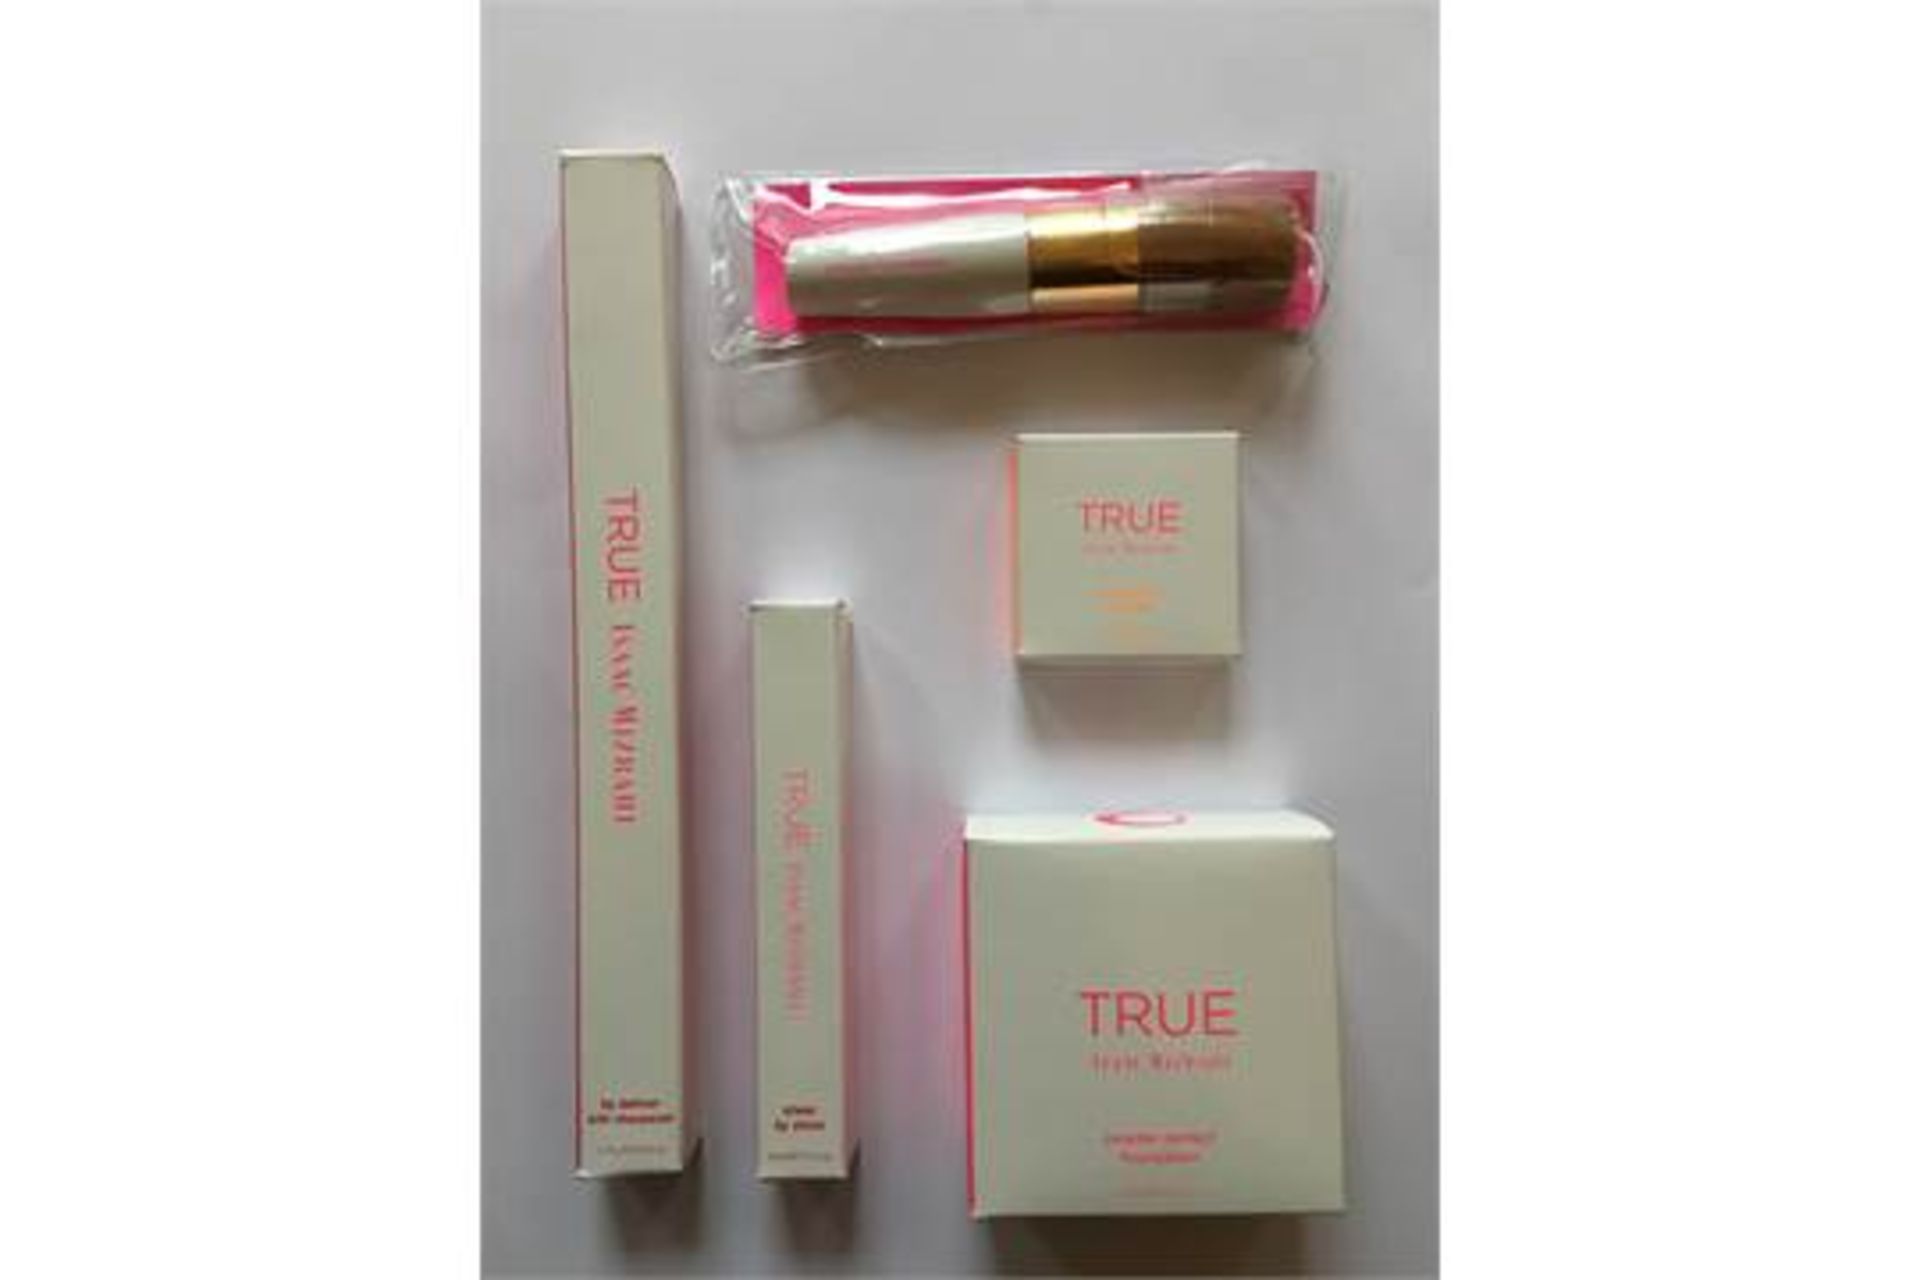 100 x True by Issac Mizrahi – 5 Item Gift Set – RRP £60 per set Each set is individually packed in a